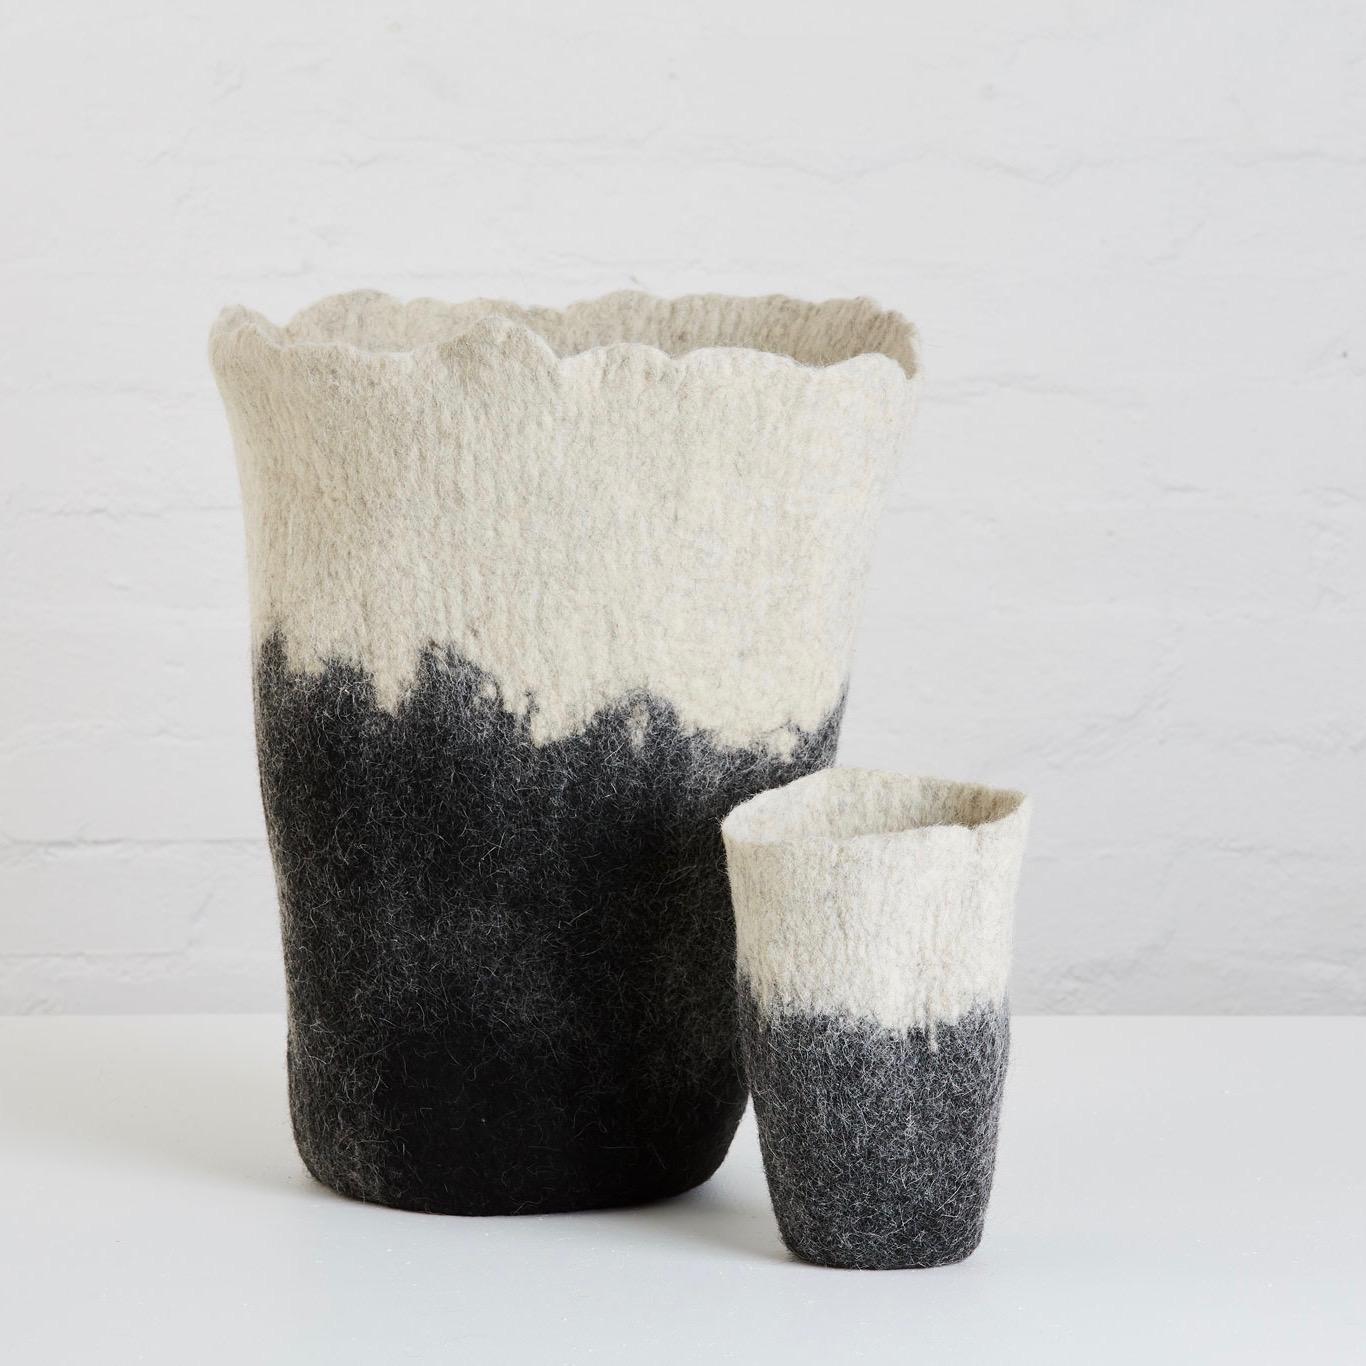 Introducing our new range of felt cushions, vases and throws. All handmade with love in Africa by a talented group of artisans. 

Our Ombre Vase is hand felted using 100% Karakul wool. Put a glass jar/vase inside and fill with flowers, a plant or